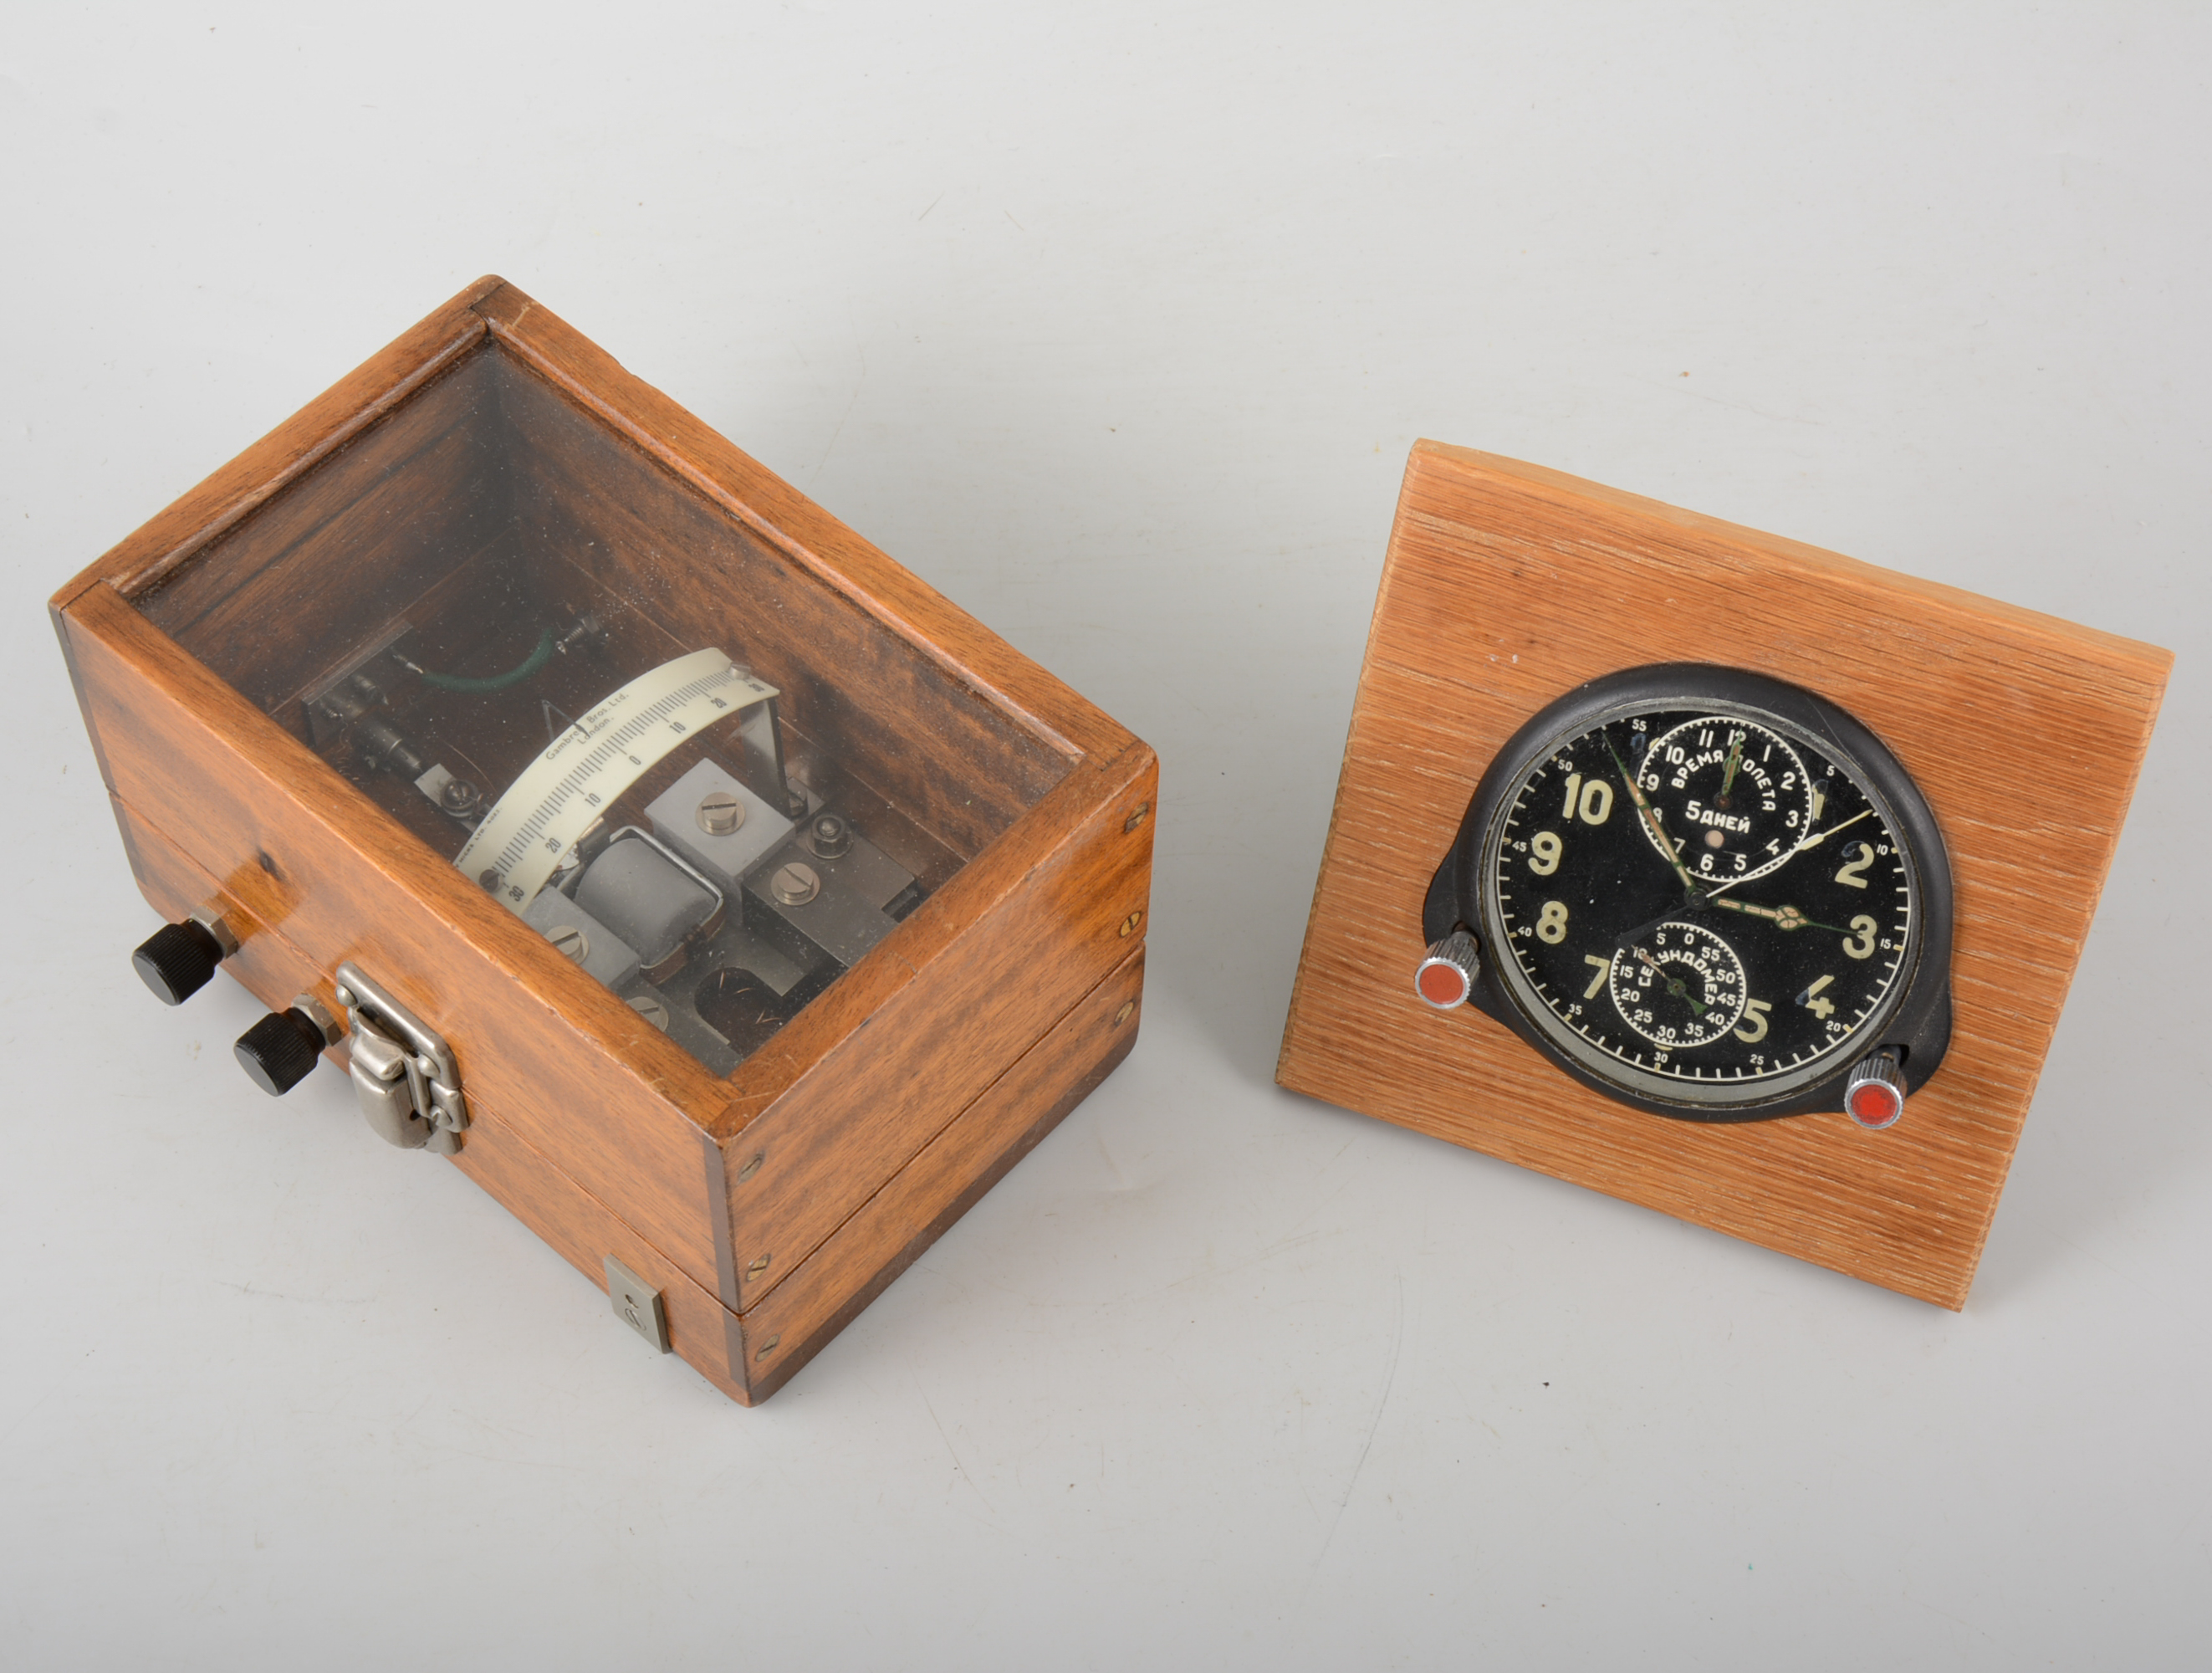 Electromagnetic gauge, Gambrell Bros Limited, London, thermometer, Casella, London, No.